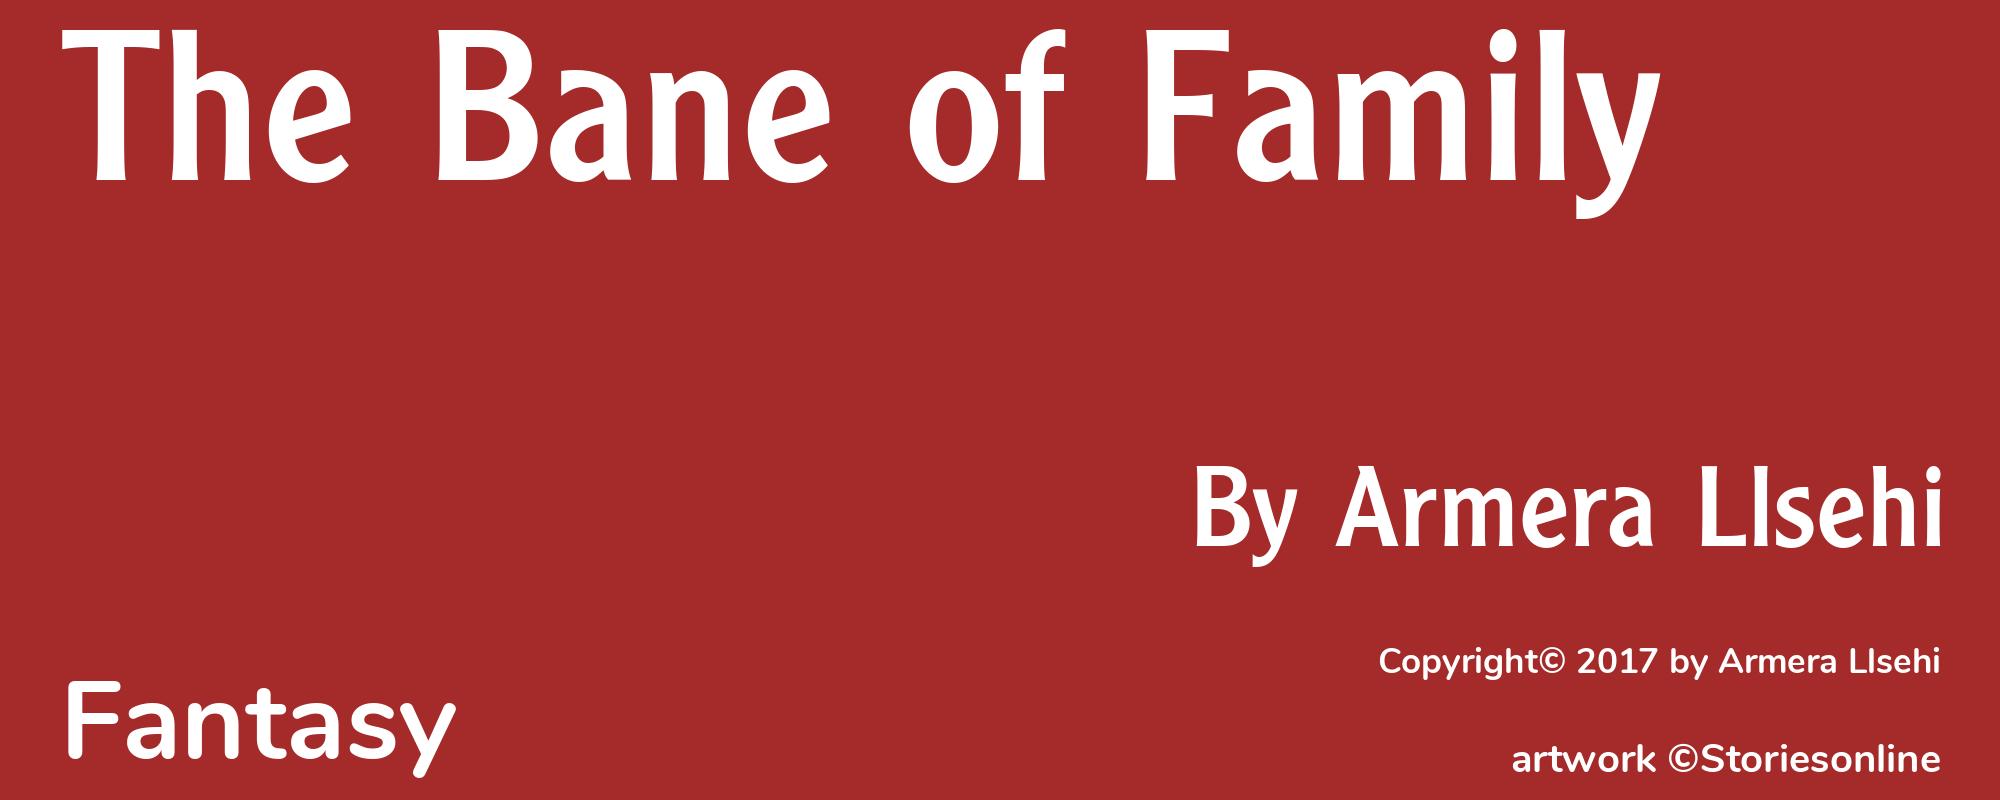 The Bane of Family - Cover